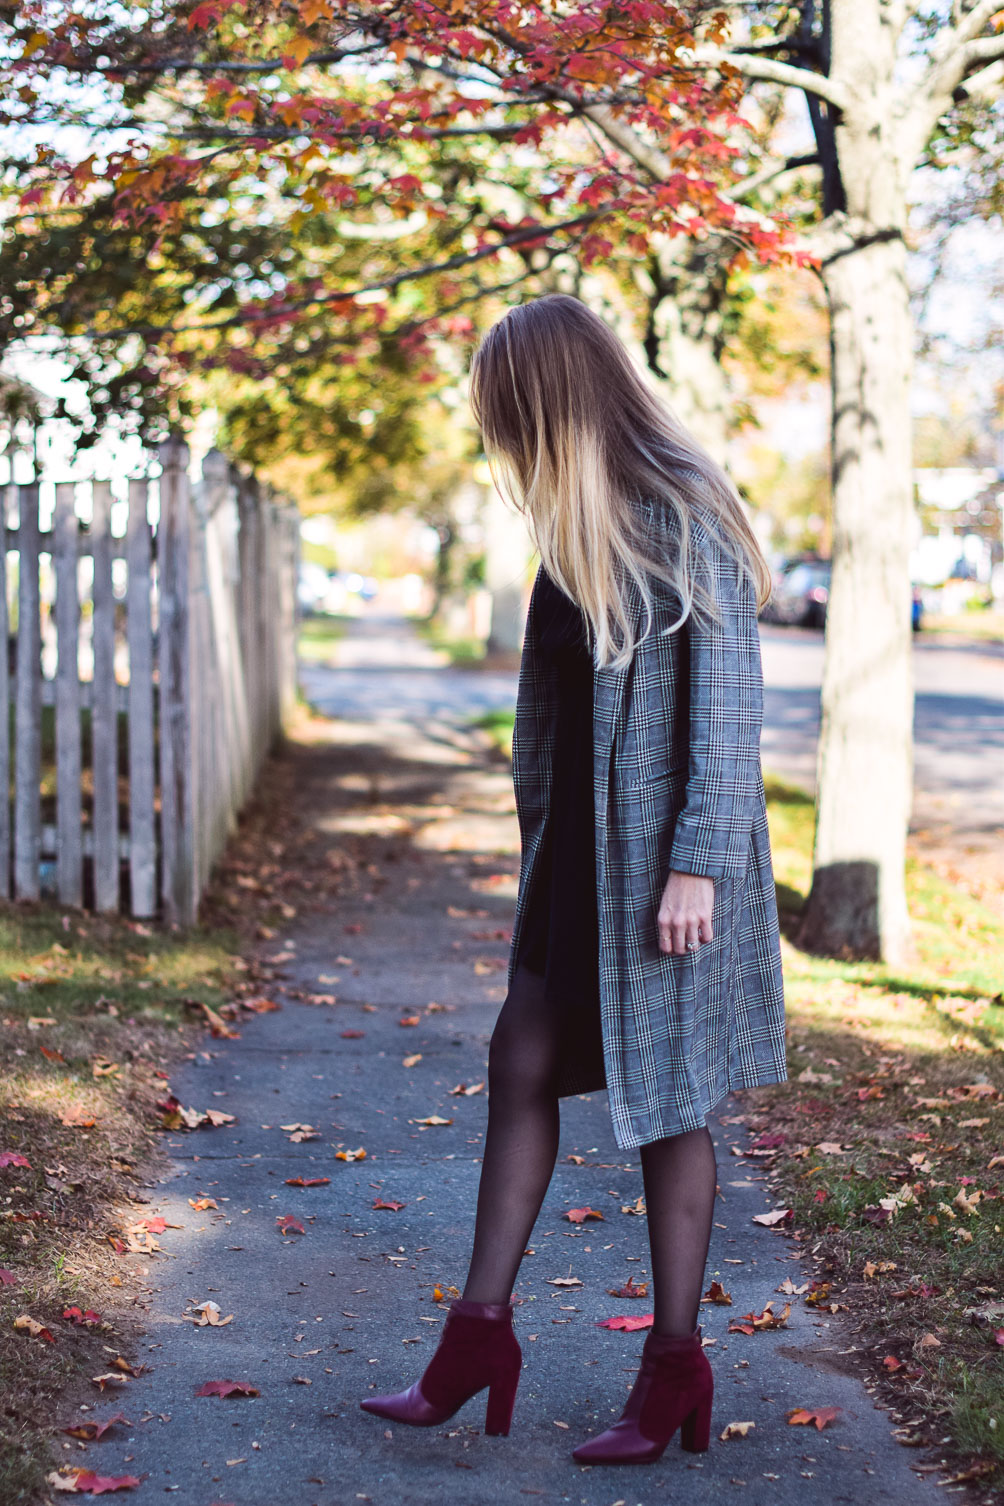 sharing an easy holiday party outfit with this Topshop balloon sleeve dress, checked trench coat, and oxblood booties